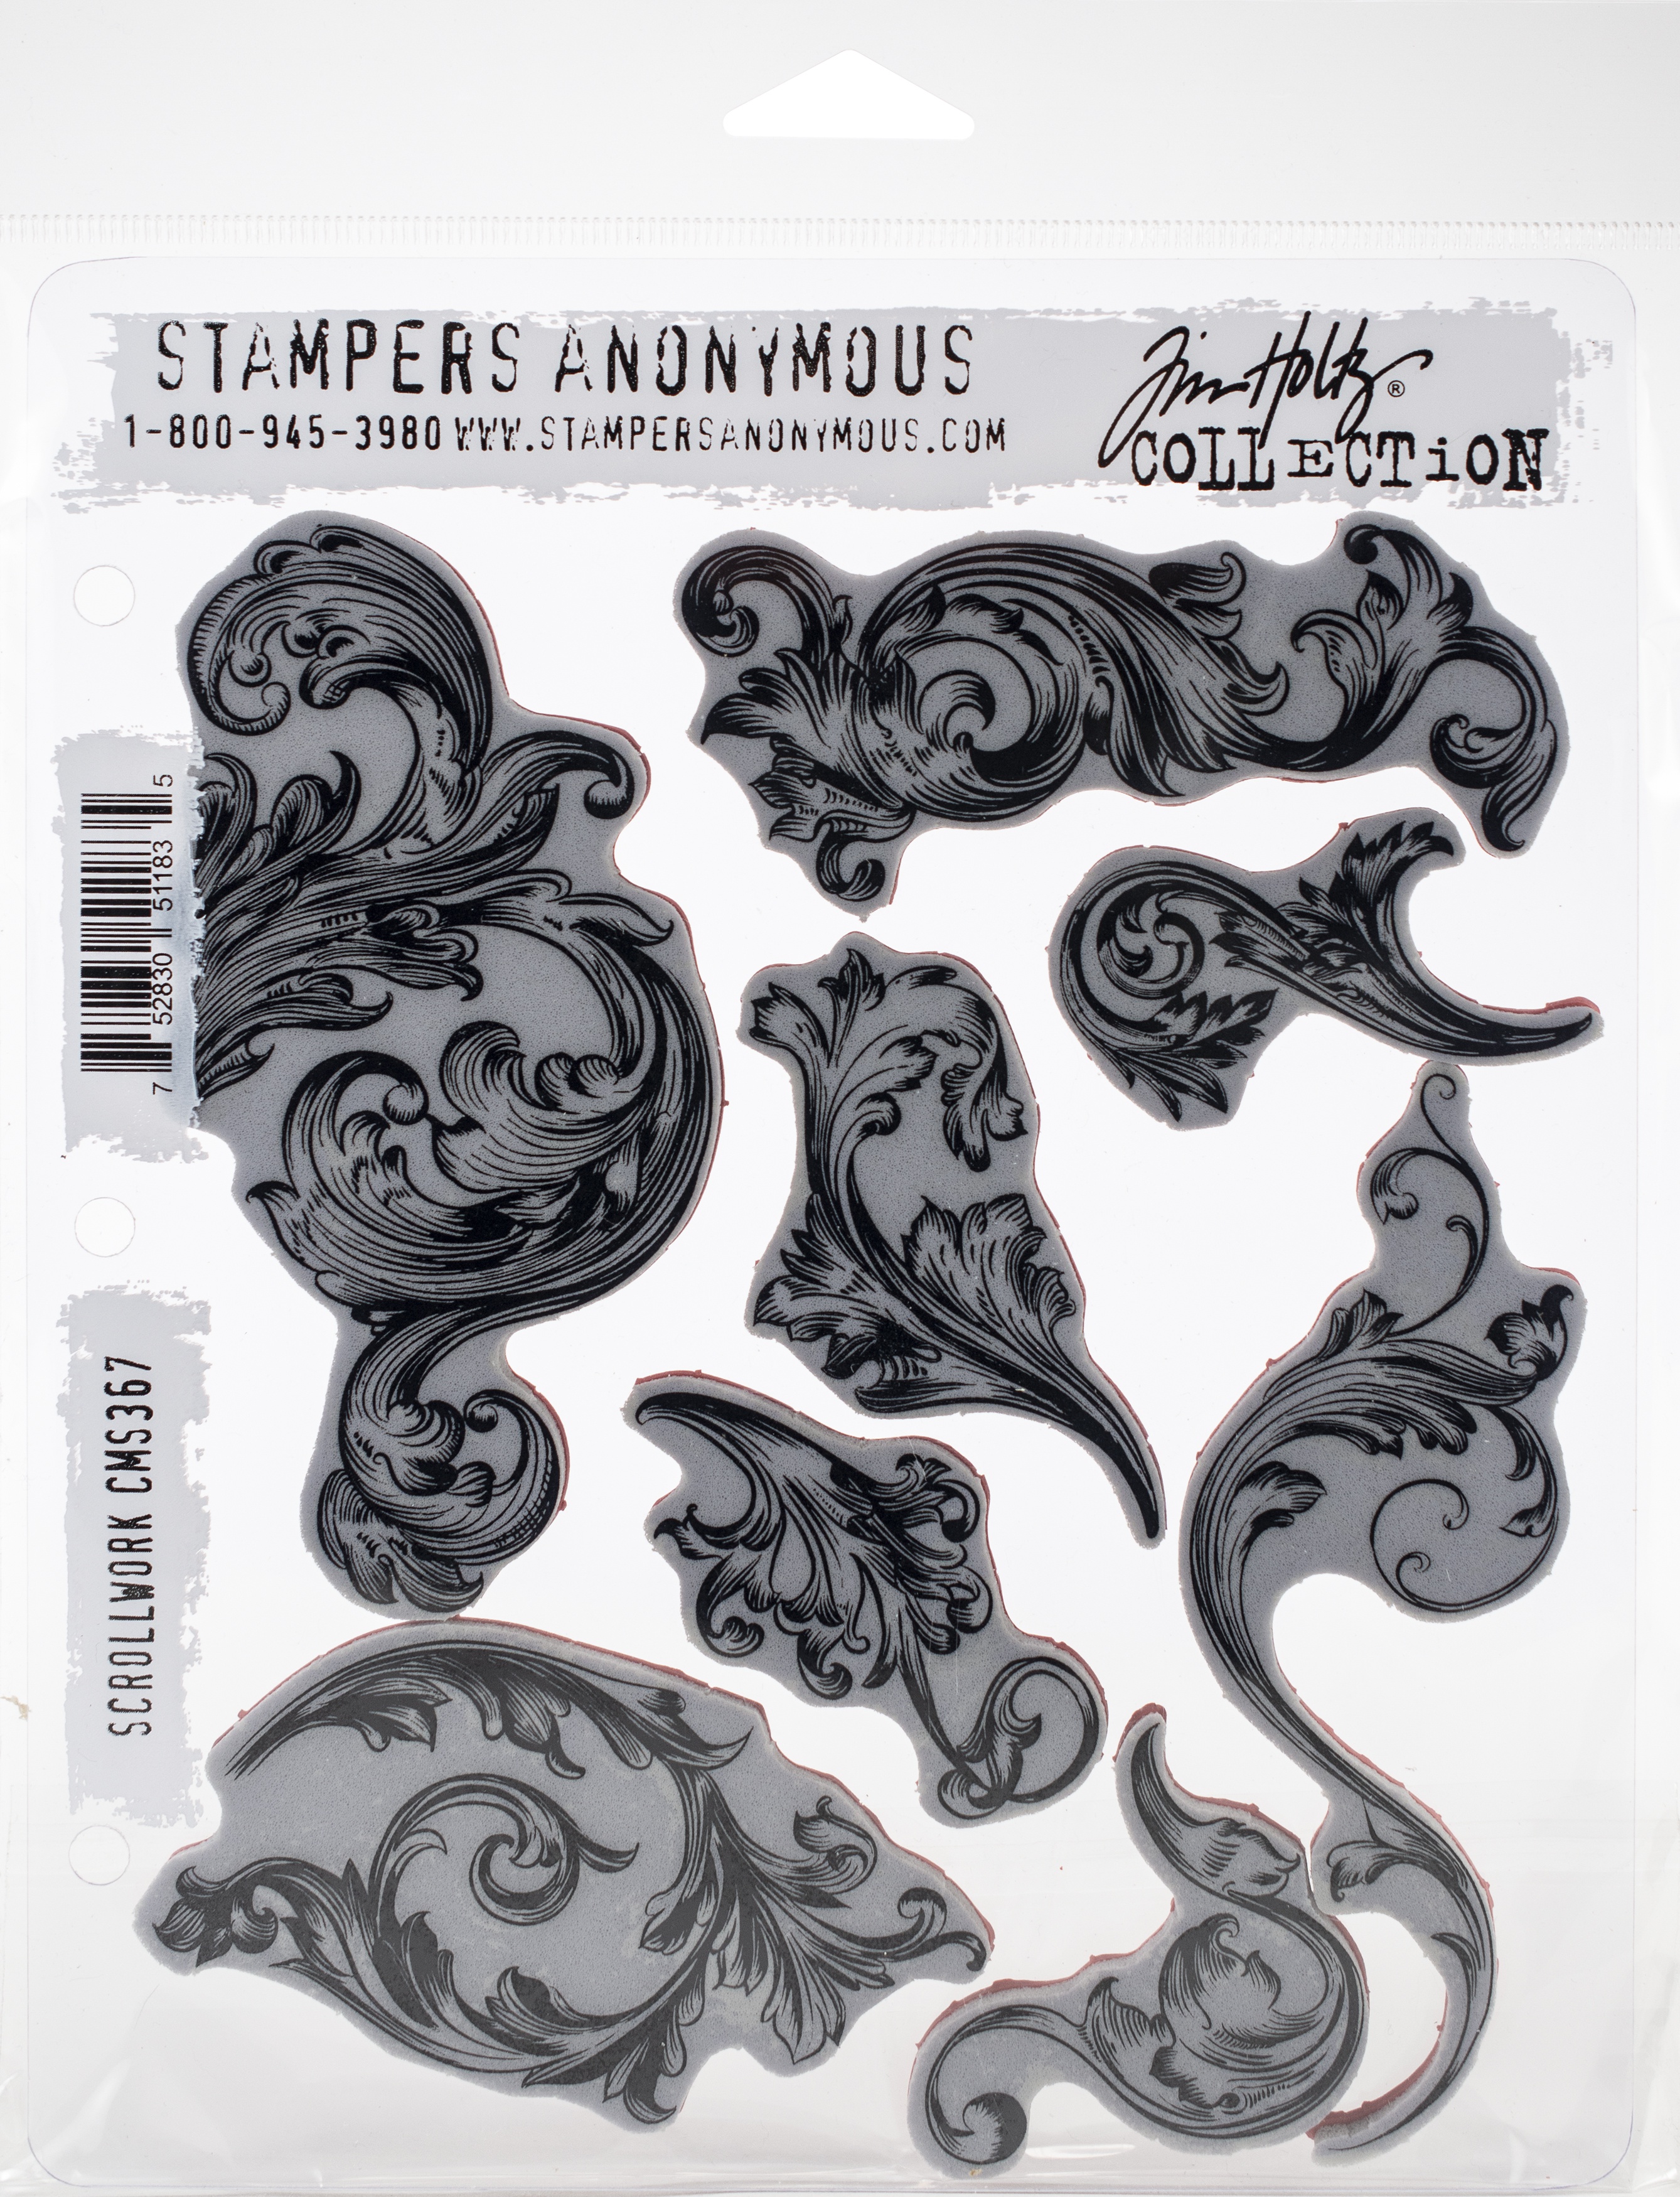 NEW Tim Holtz Stampers Anonymous "SCRIBBLY CHRISTMAS" Rubber Cling Stamp Set